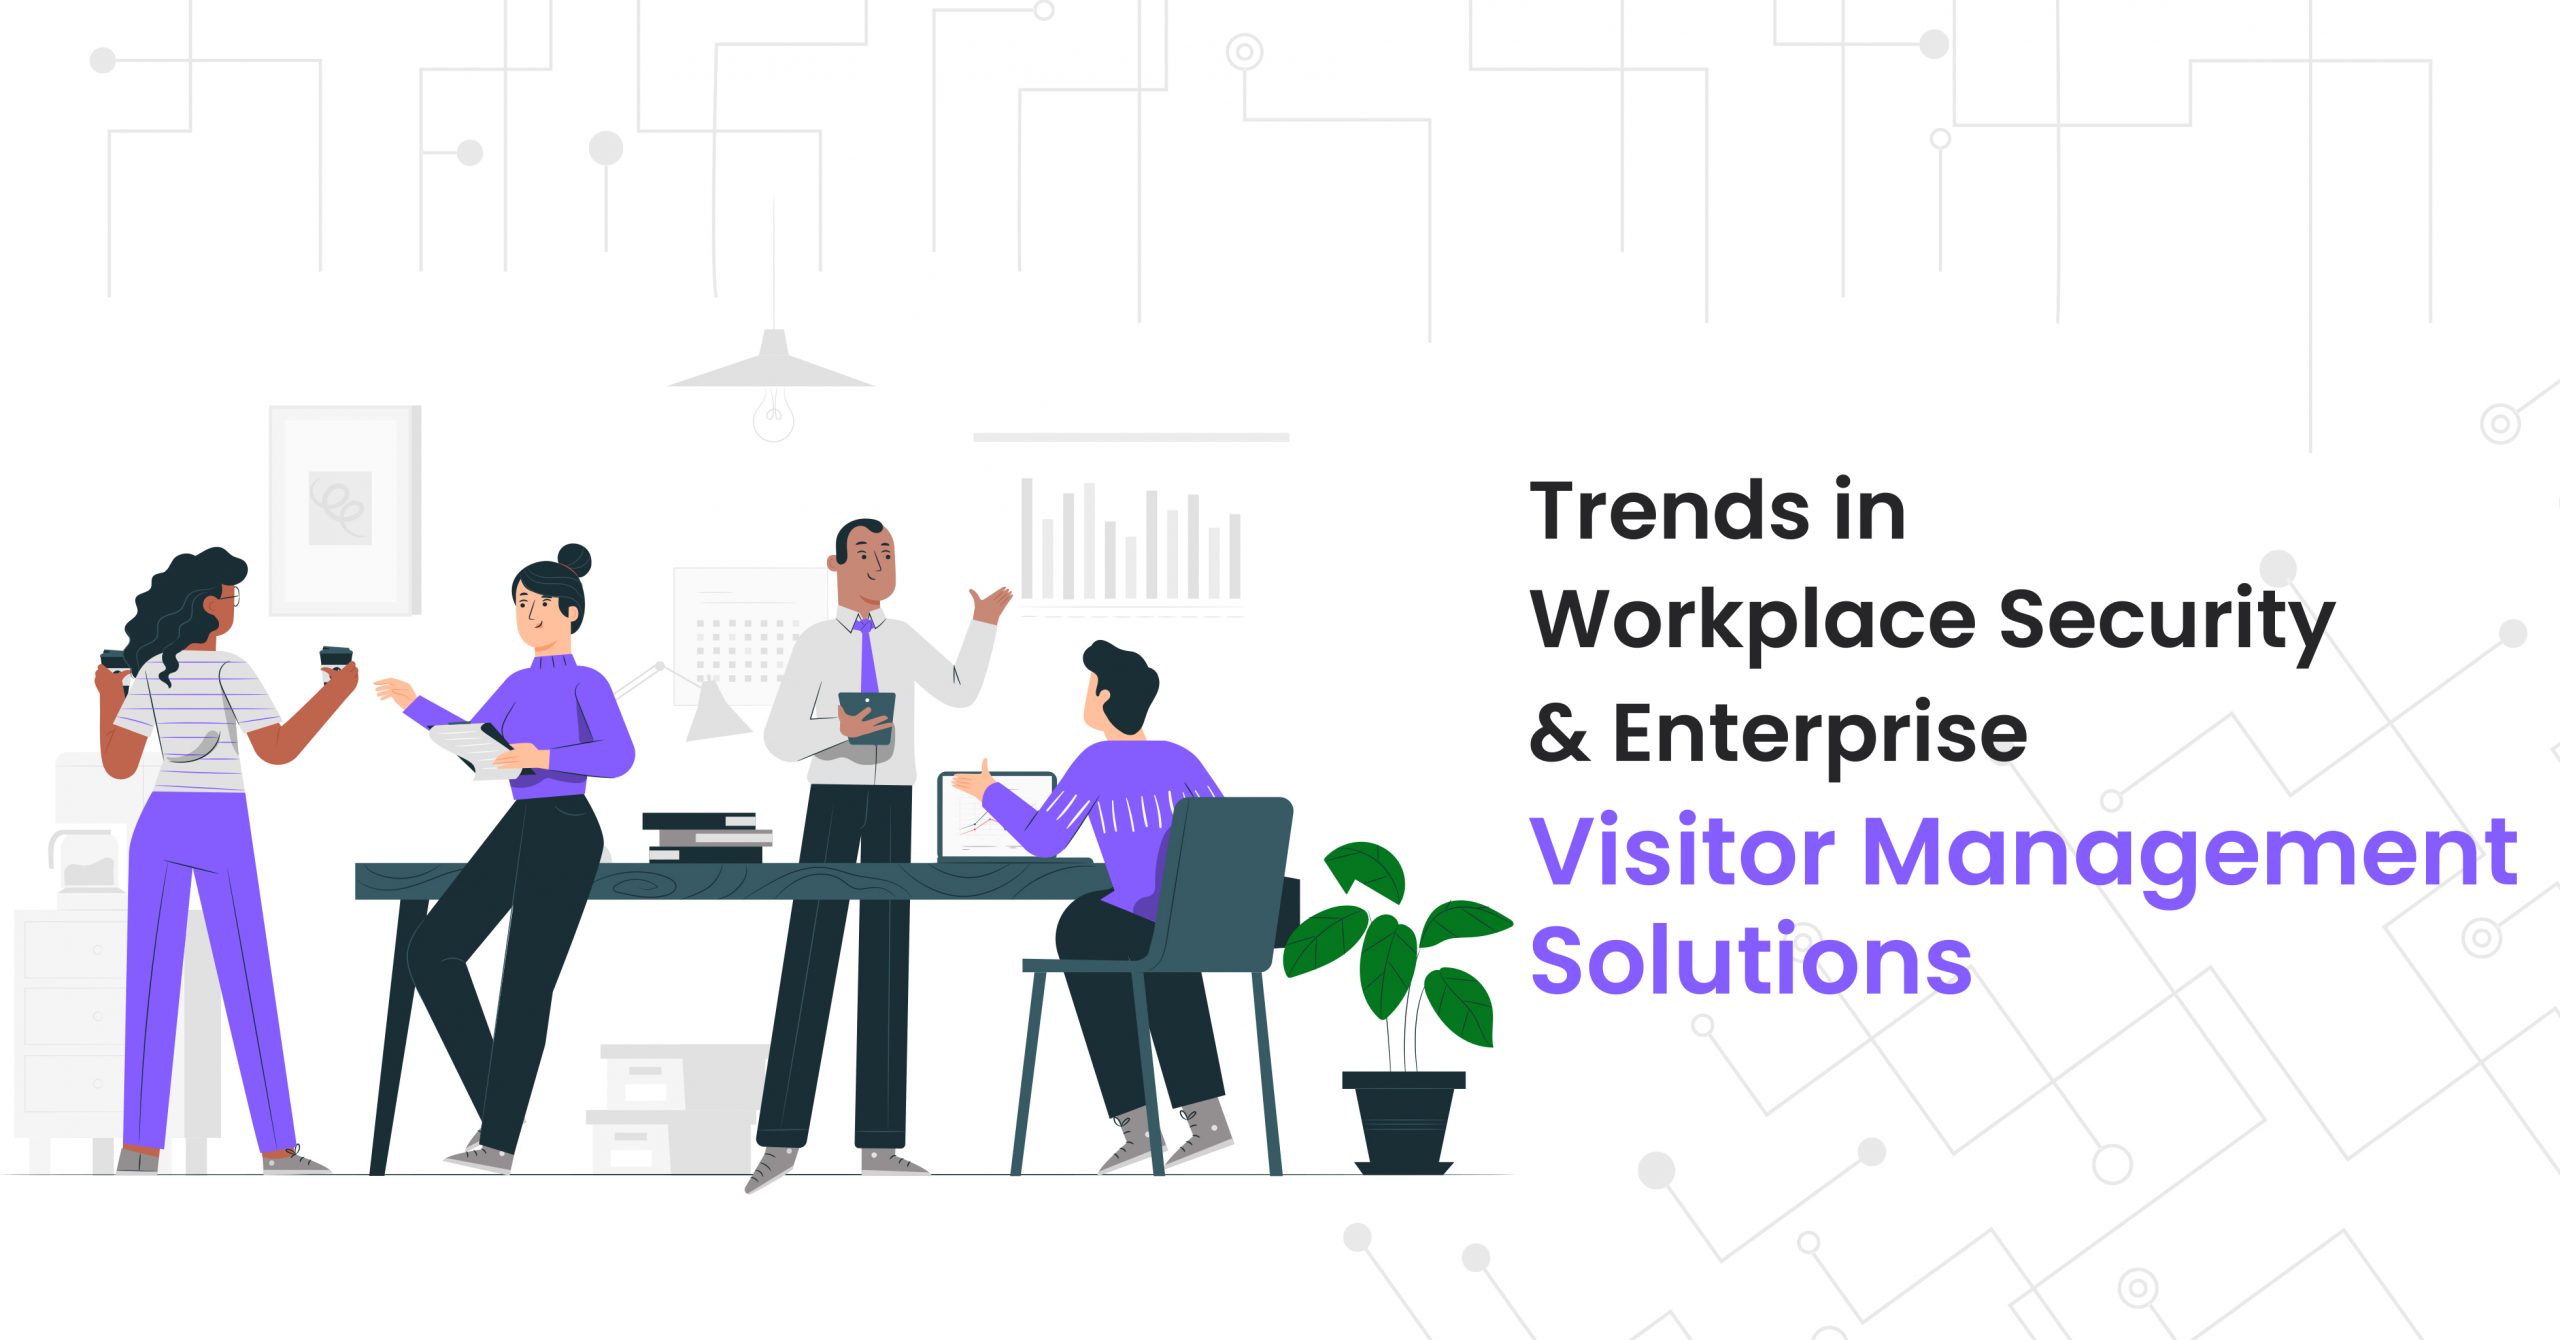 Trends in Workplace Security and Enterprise Visitor Management Solutions